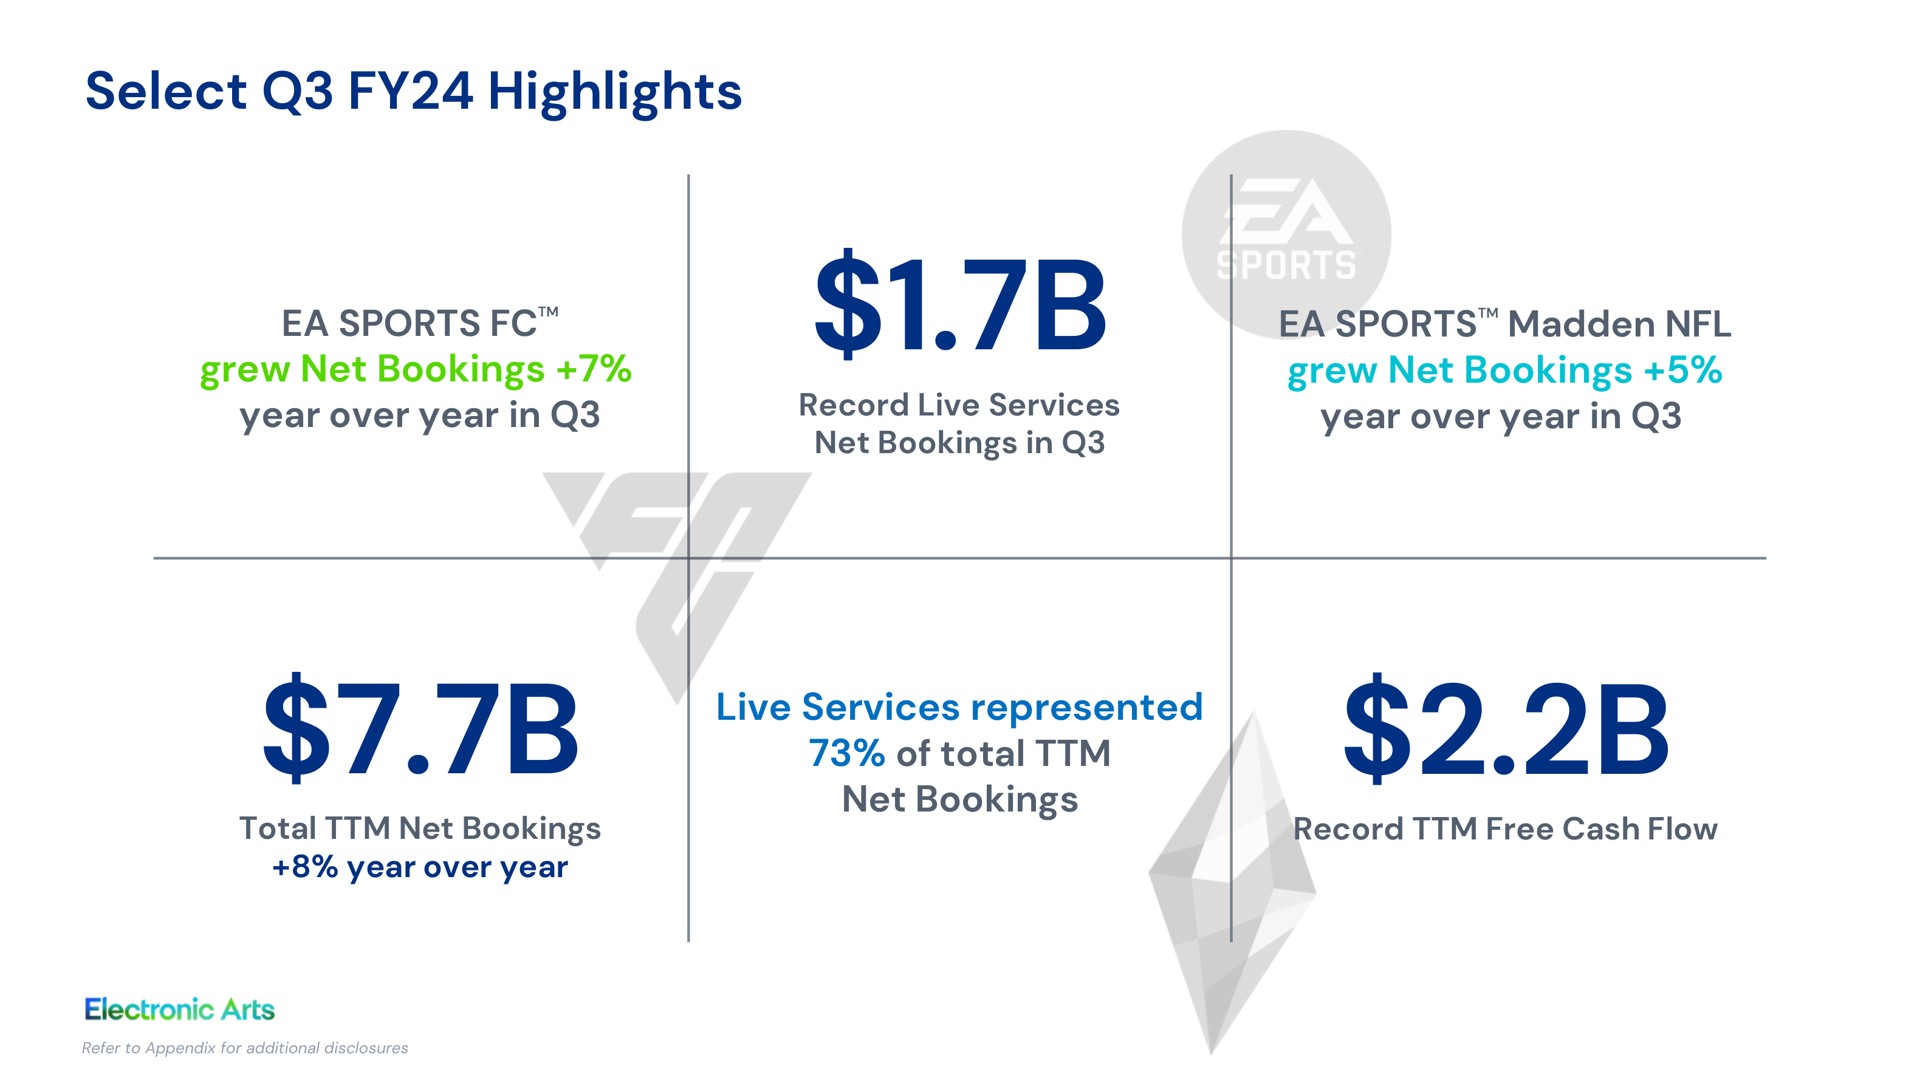 select highlights sports grew net bookings year over year in record live services net bookings in madden grew net bookings year over year in total net bookings year over year live services represented of total net bookings record free cash flow is | Electronic Arts